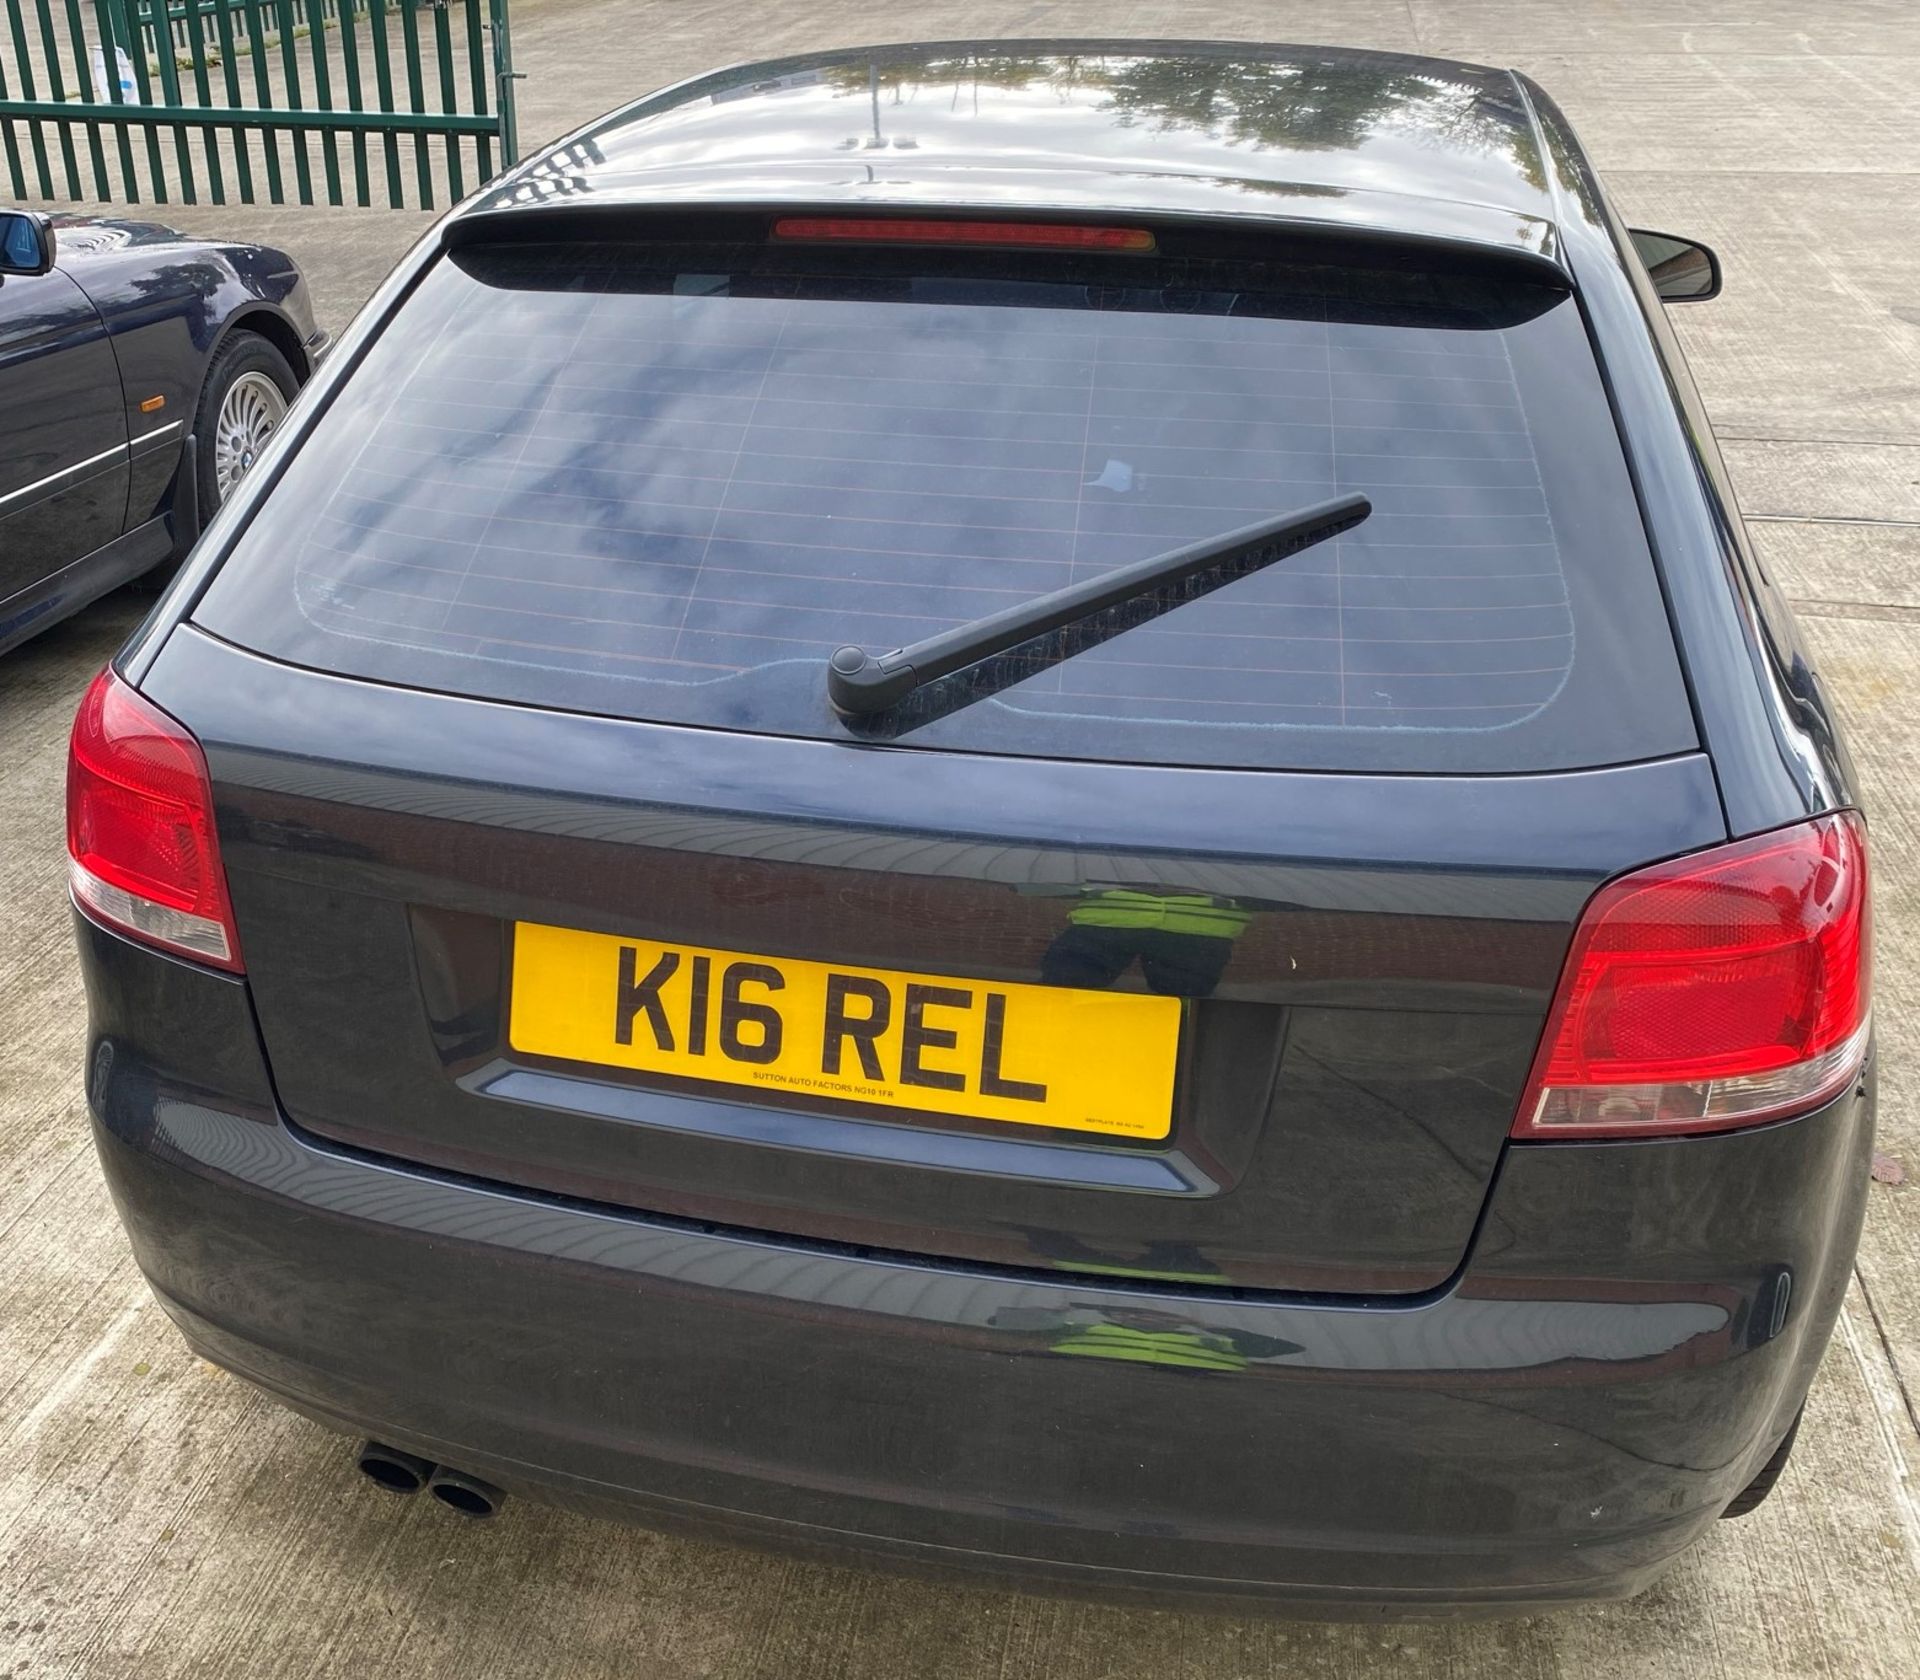 SEIZED VEHICLE: AUDI A3 S LINE 3 DOOR COUPE - diesel - black - black leather interior Reg No: Not - Image 5 of 9